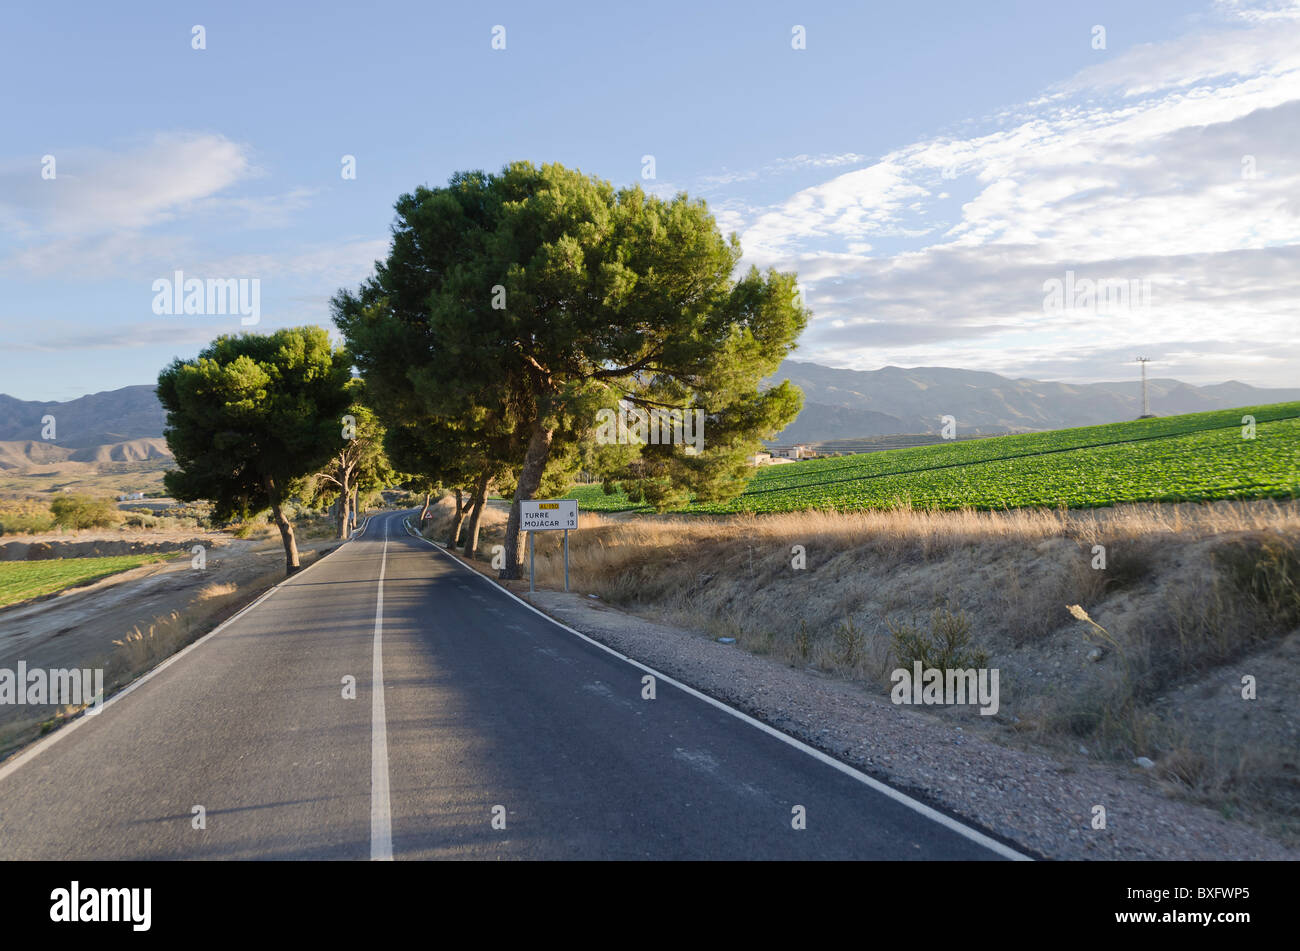 A roadway near Alfaix, Turre, Almeria, Spain just before sunset. The road issei's straight and there are some lovely trees both sides of the road. Stock Photo